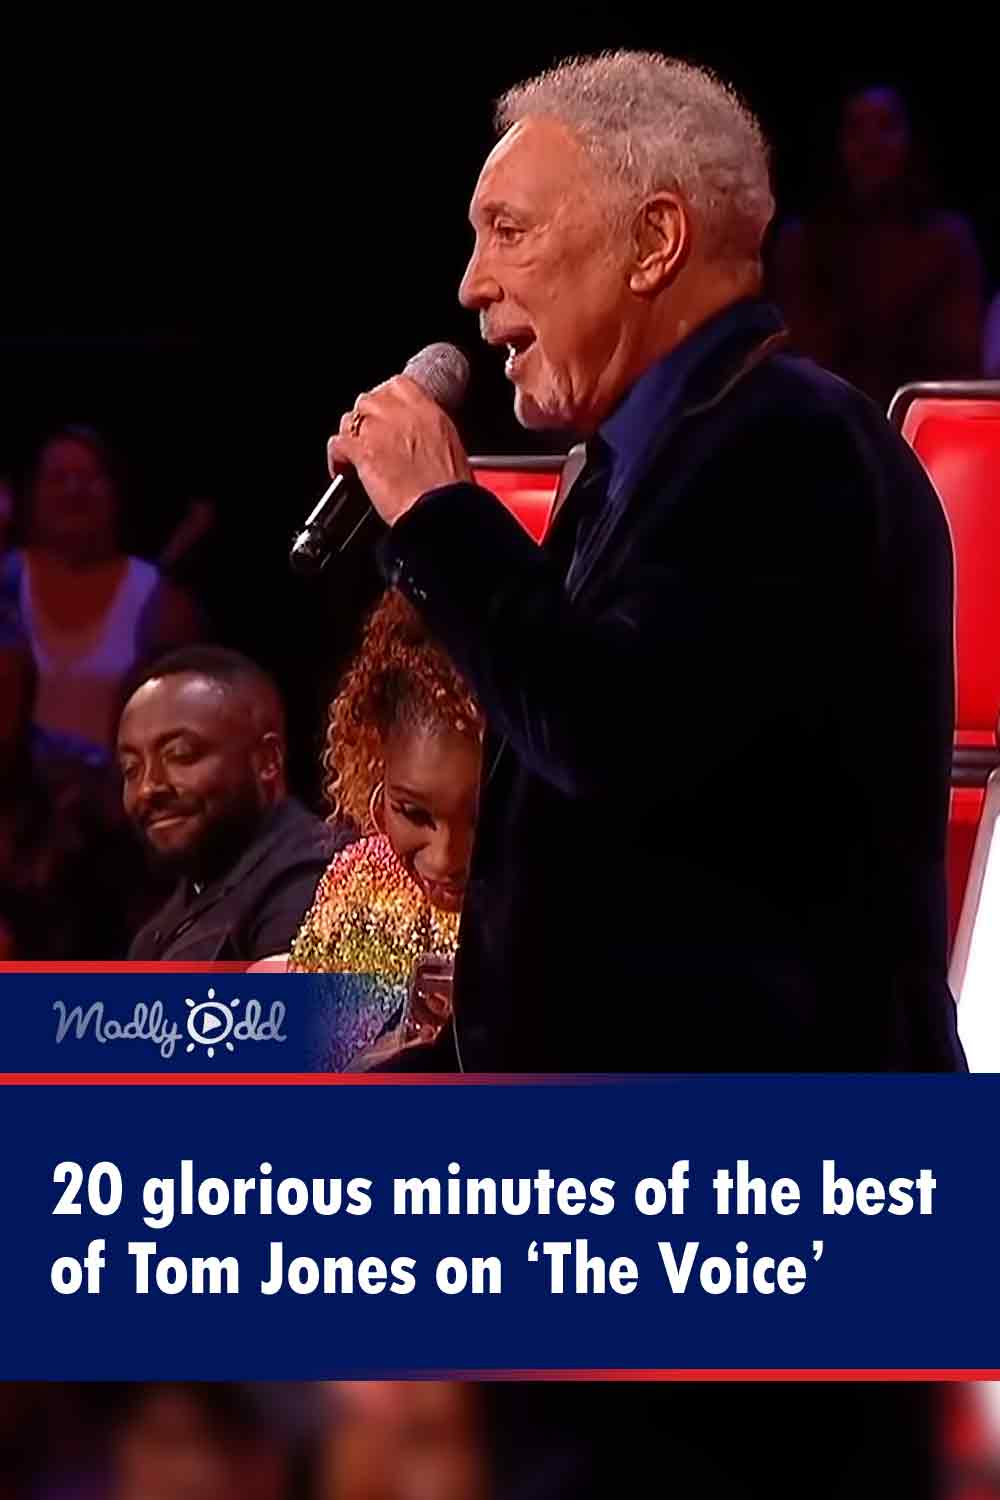 20 glorious minutes of the best of Tom Jones on ‘The Voice’